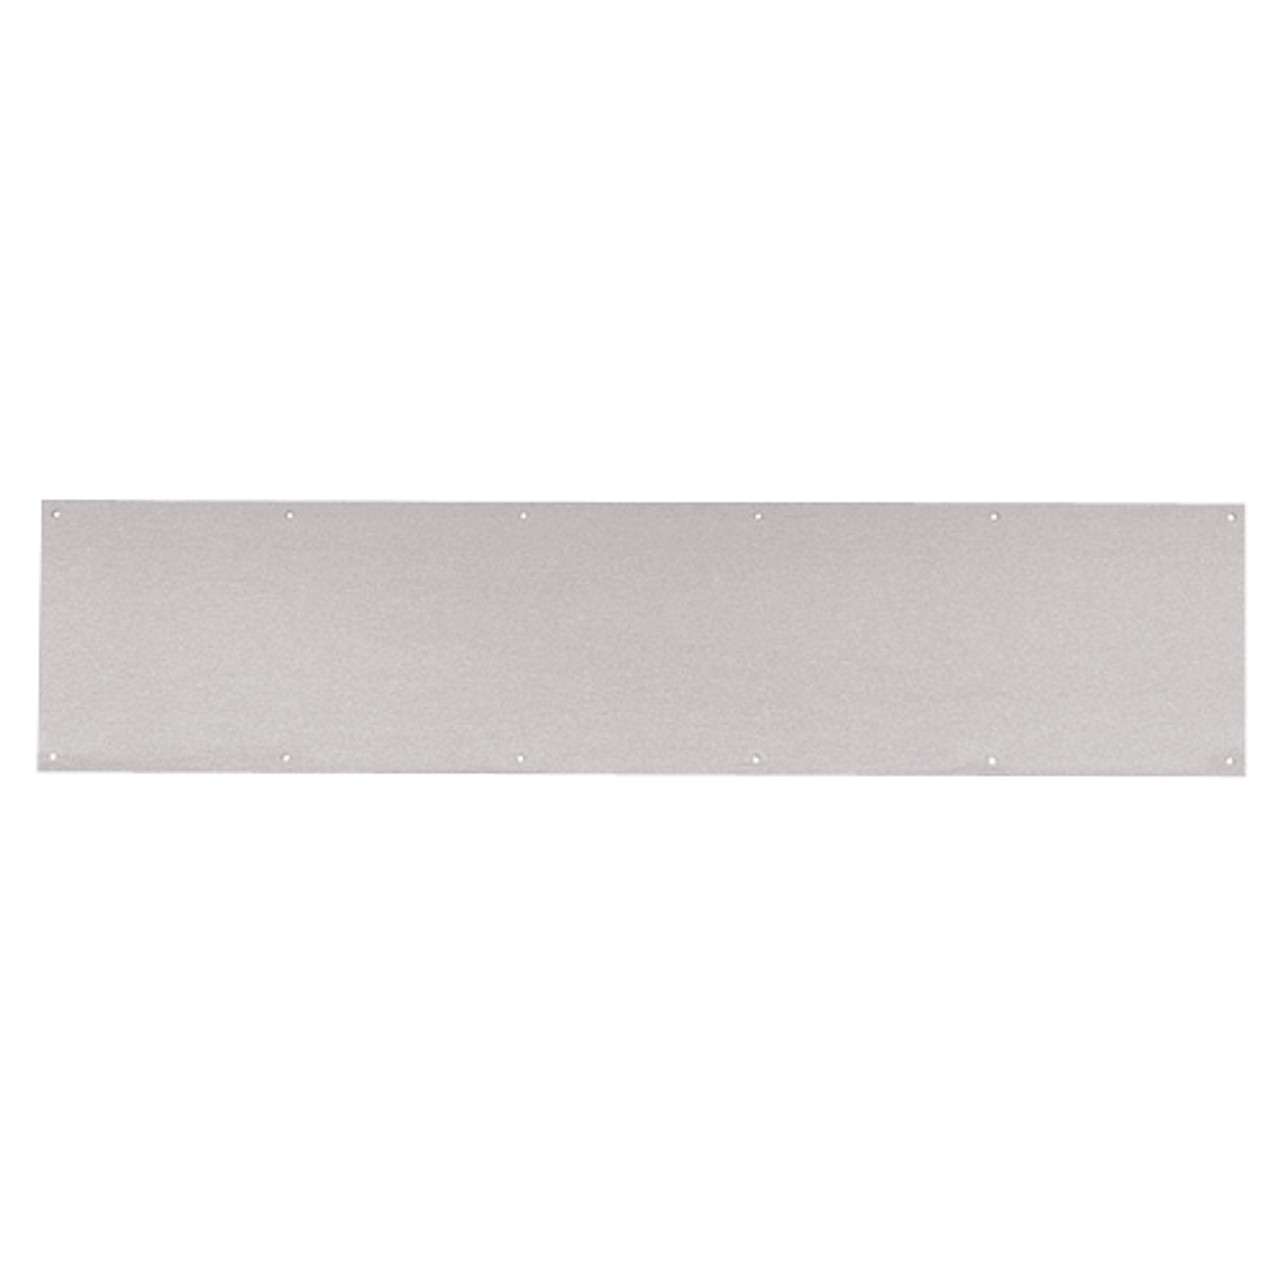 8400-US32D-3x34-B-CS Ives 8400 Series Protection Plate in Satin Stainless Steel